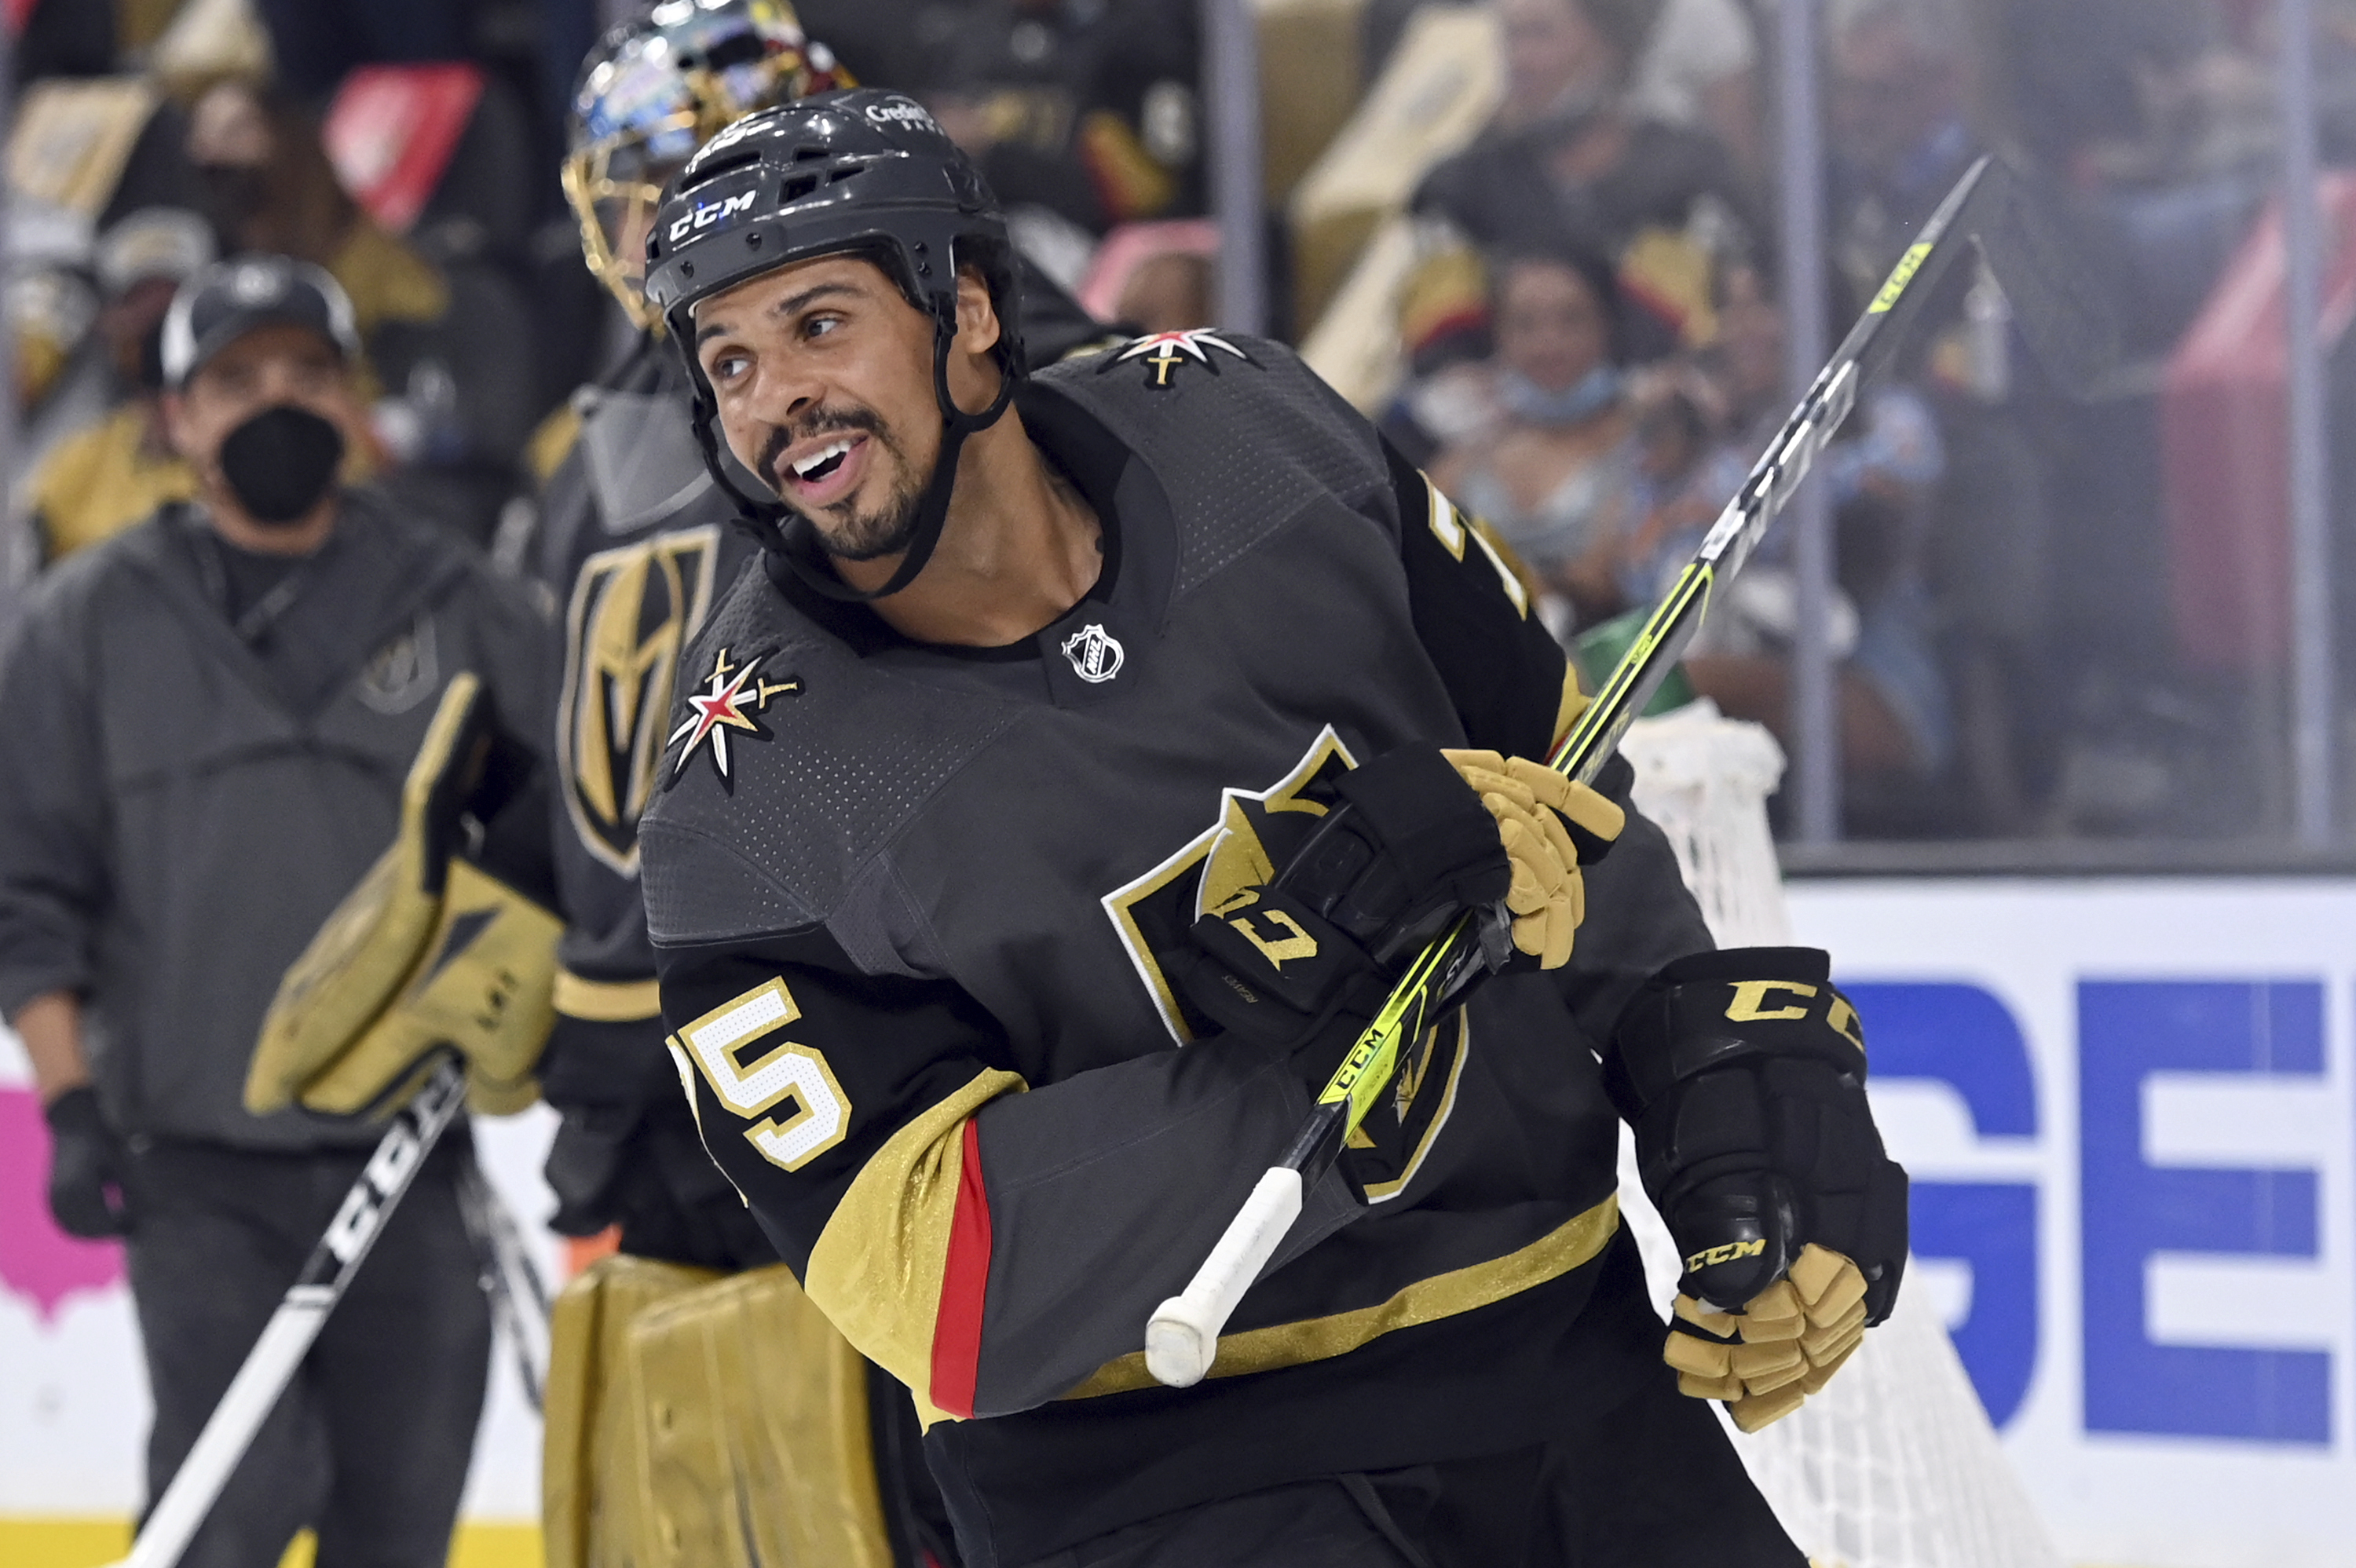 Vegas Golden Knights: Ryan Reaves really can do it all